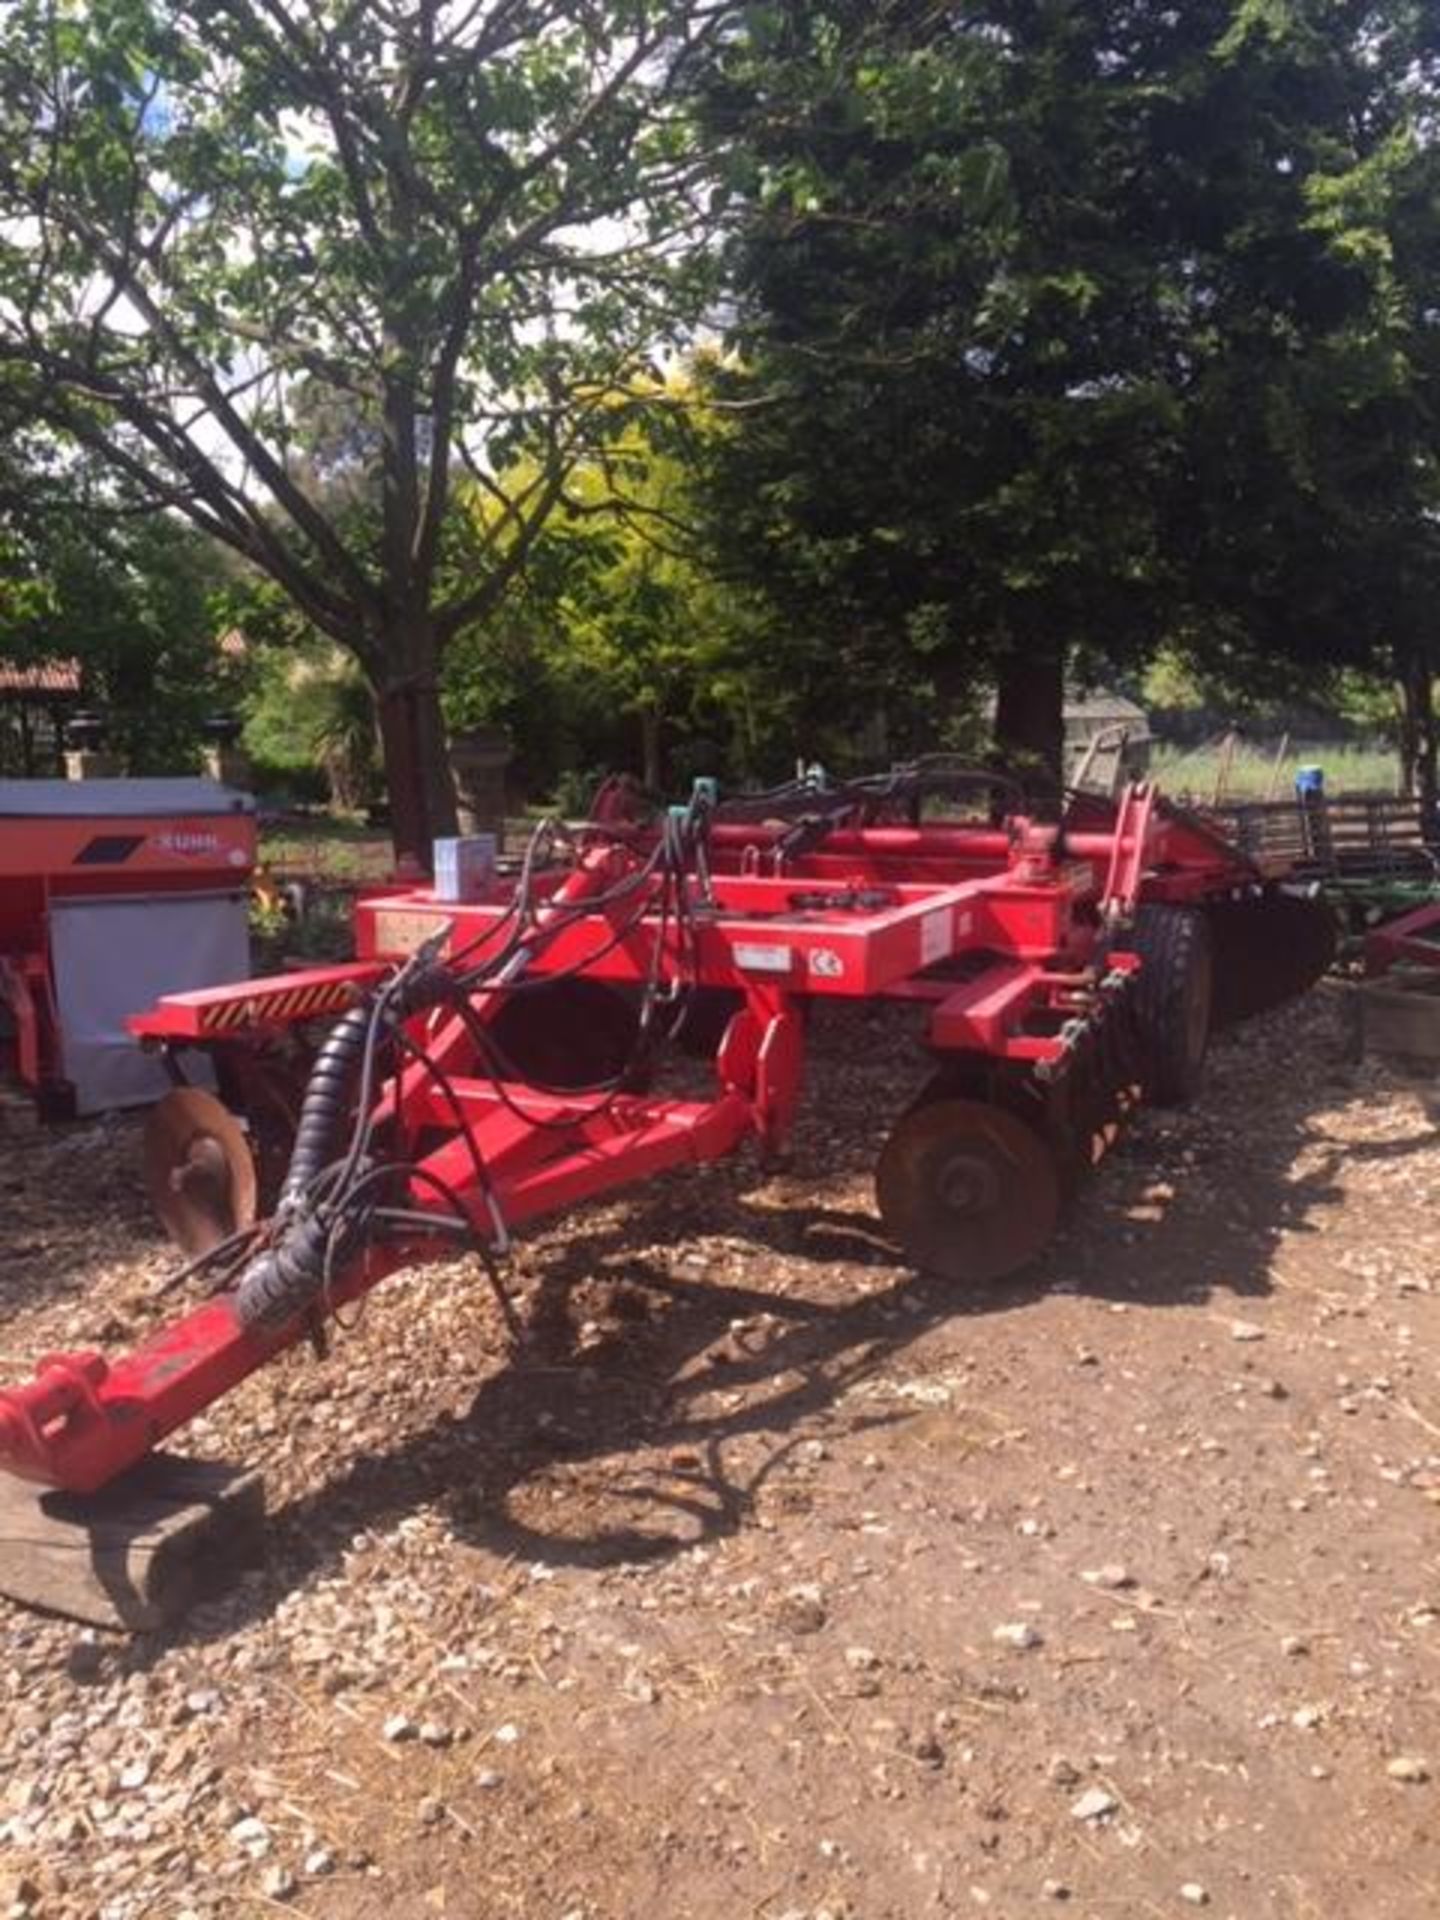 Massano heavy duty 4m folding disc harrow with 34 discs. Barn stored, excellent condition, very - Image 4 of 9